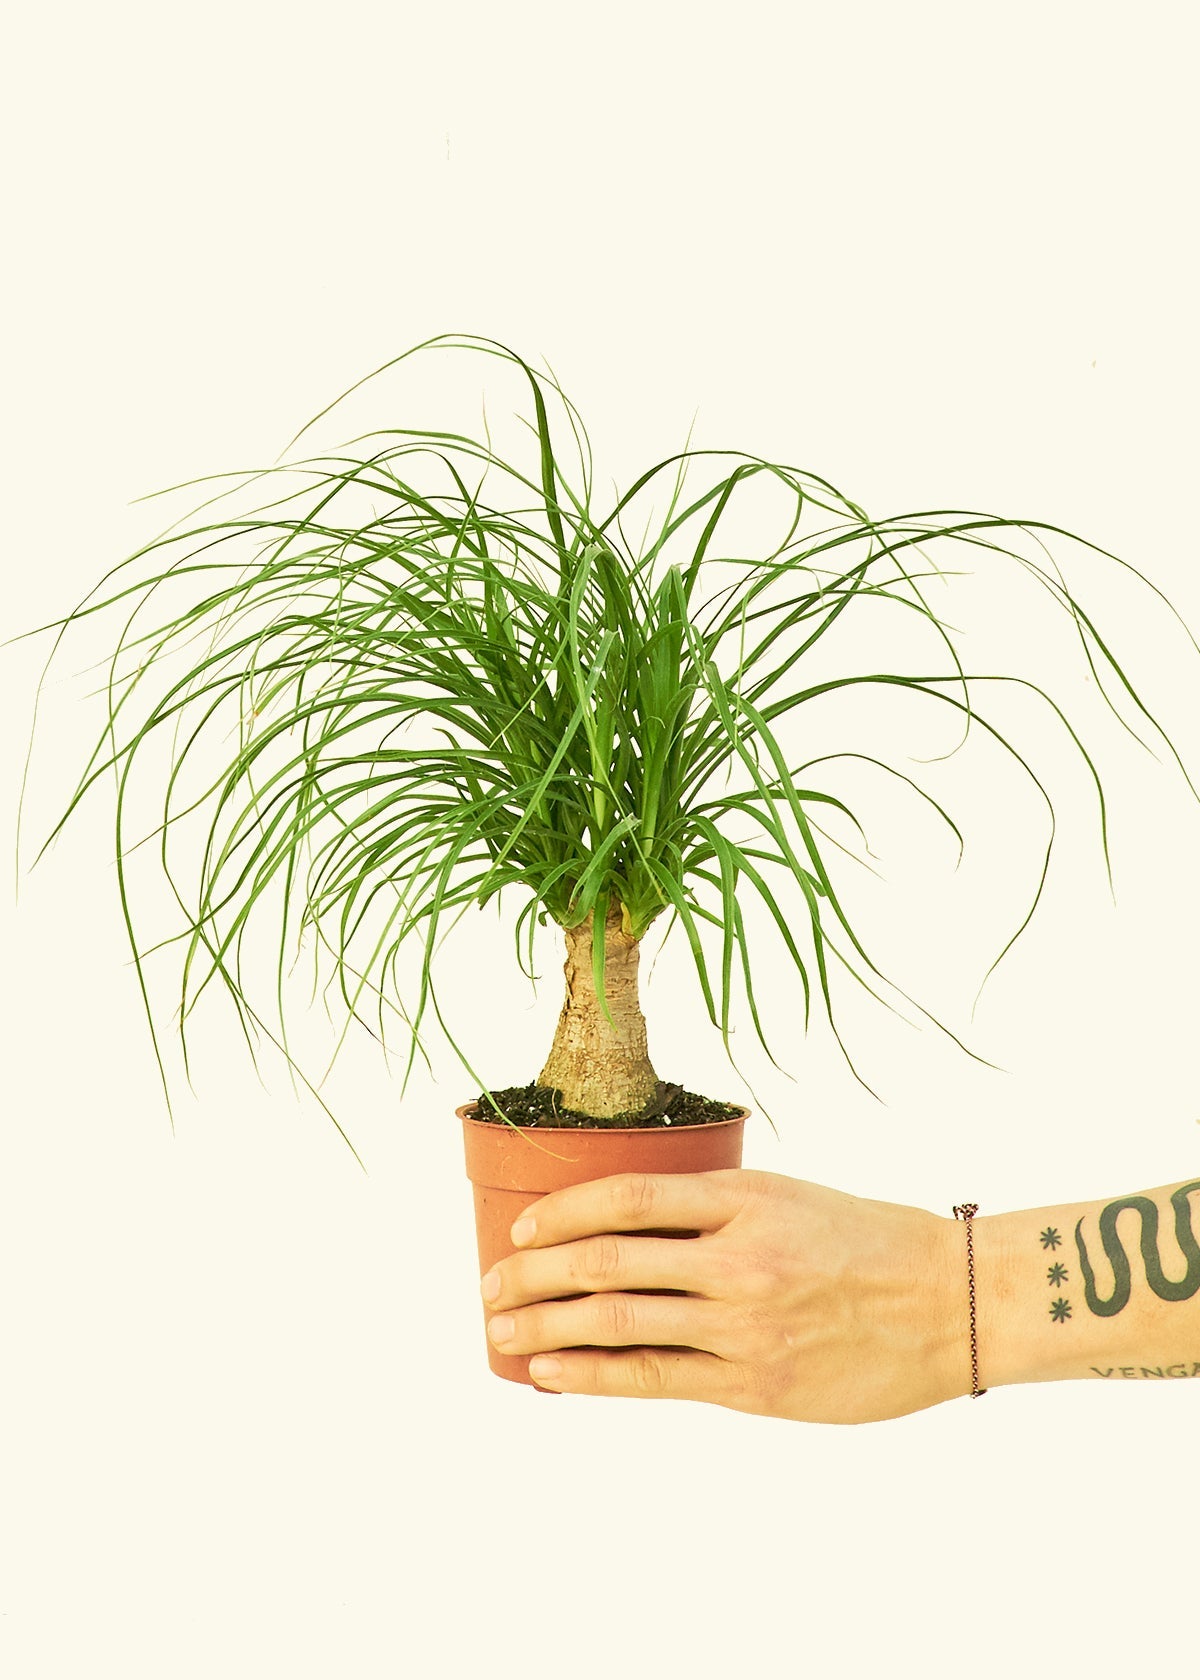 Small Ponytail Palm (Beaucarnea recurvata) in a grow pot.